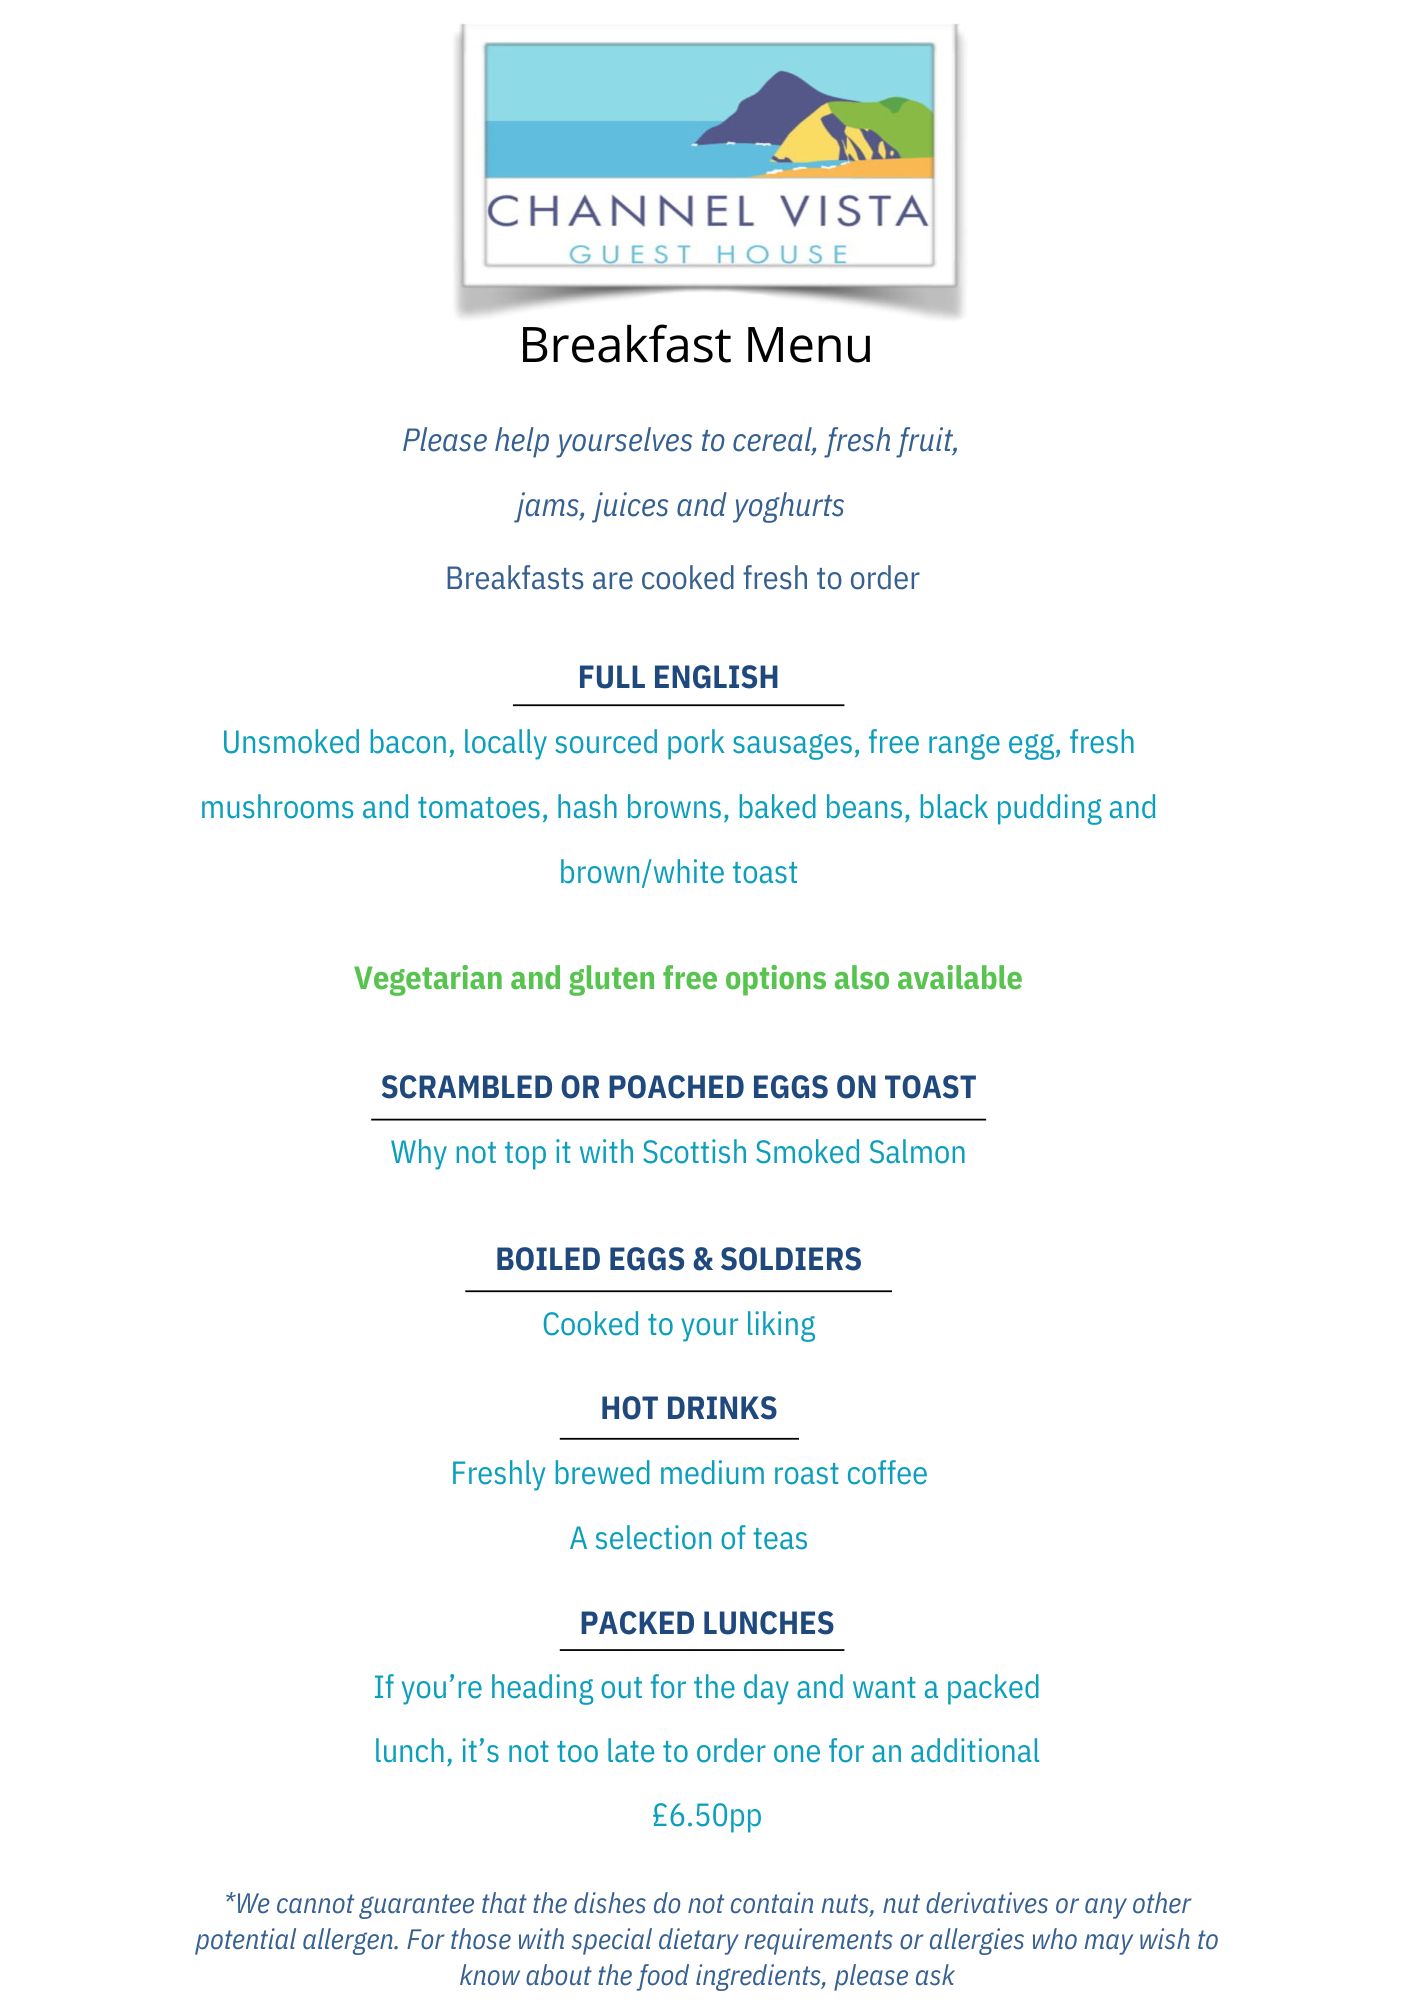 Breakfast Menu Please help yourselves to cereal, fresh fruit, jams, juices, pastries and yoghurts. (2)